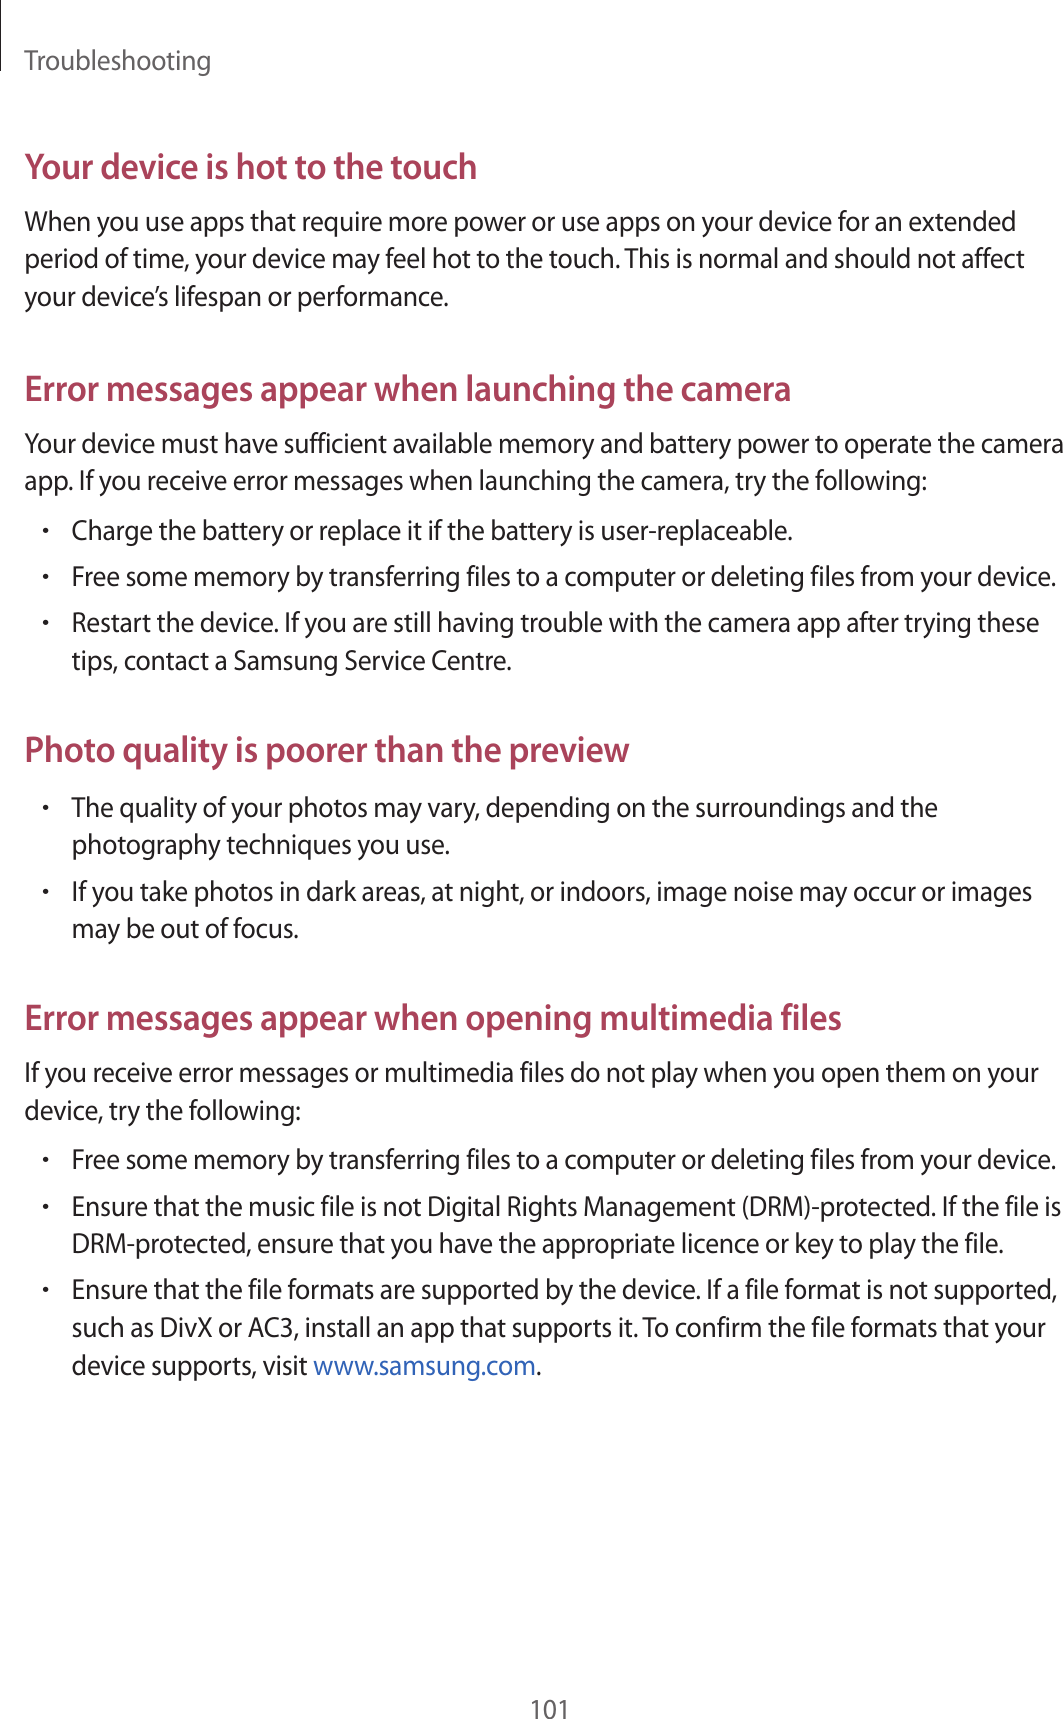 Troubleshooting101Your device is hot to the touchWhen you use apps that require more power or use apps on your device for an extended period of time, your device may feel hot to the touch. This is normal and should not affect your device’s lifespan or performance.Error messages appear when launching the cameraYour device must have sufficient available memory and battery power to operate the camera app. If you receive error messages when launching the camera, try the following:•Charge the battery or replace it if the battery is user-replaceable.•Free some memory by transferring files to a computer or deleting files from your device.•Restart the device. If you are still having trouble with the camera app after trying these tips, contact a Samsung Service Centre.Photo quality is poorer than the preview•The quality of your photos may vary, depending on the surroundings and the photography techniques you use.•If you take photos in dark areas, at night, or indoors, image noise may occur or images may be out of focus.Error messages appear when opening multimedia filesIf you receive error messages or multimedia files do not play when you open them on your device, try the following:•Free some memory by transferring files to a computer or deleting files from your device.•Ensure that the music file is not Digital Rights Management (DRM)-protected. If the file is DRM-protected, ensure that you have the appropriate licence or key to play the file.•Ensure that the file formats are supported by the device. If a file format is not supported, such as DivX or AC3, install an app that supports it. To confirm the file formats that your device supports, visit www.samsung.com.